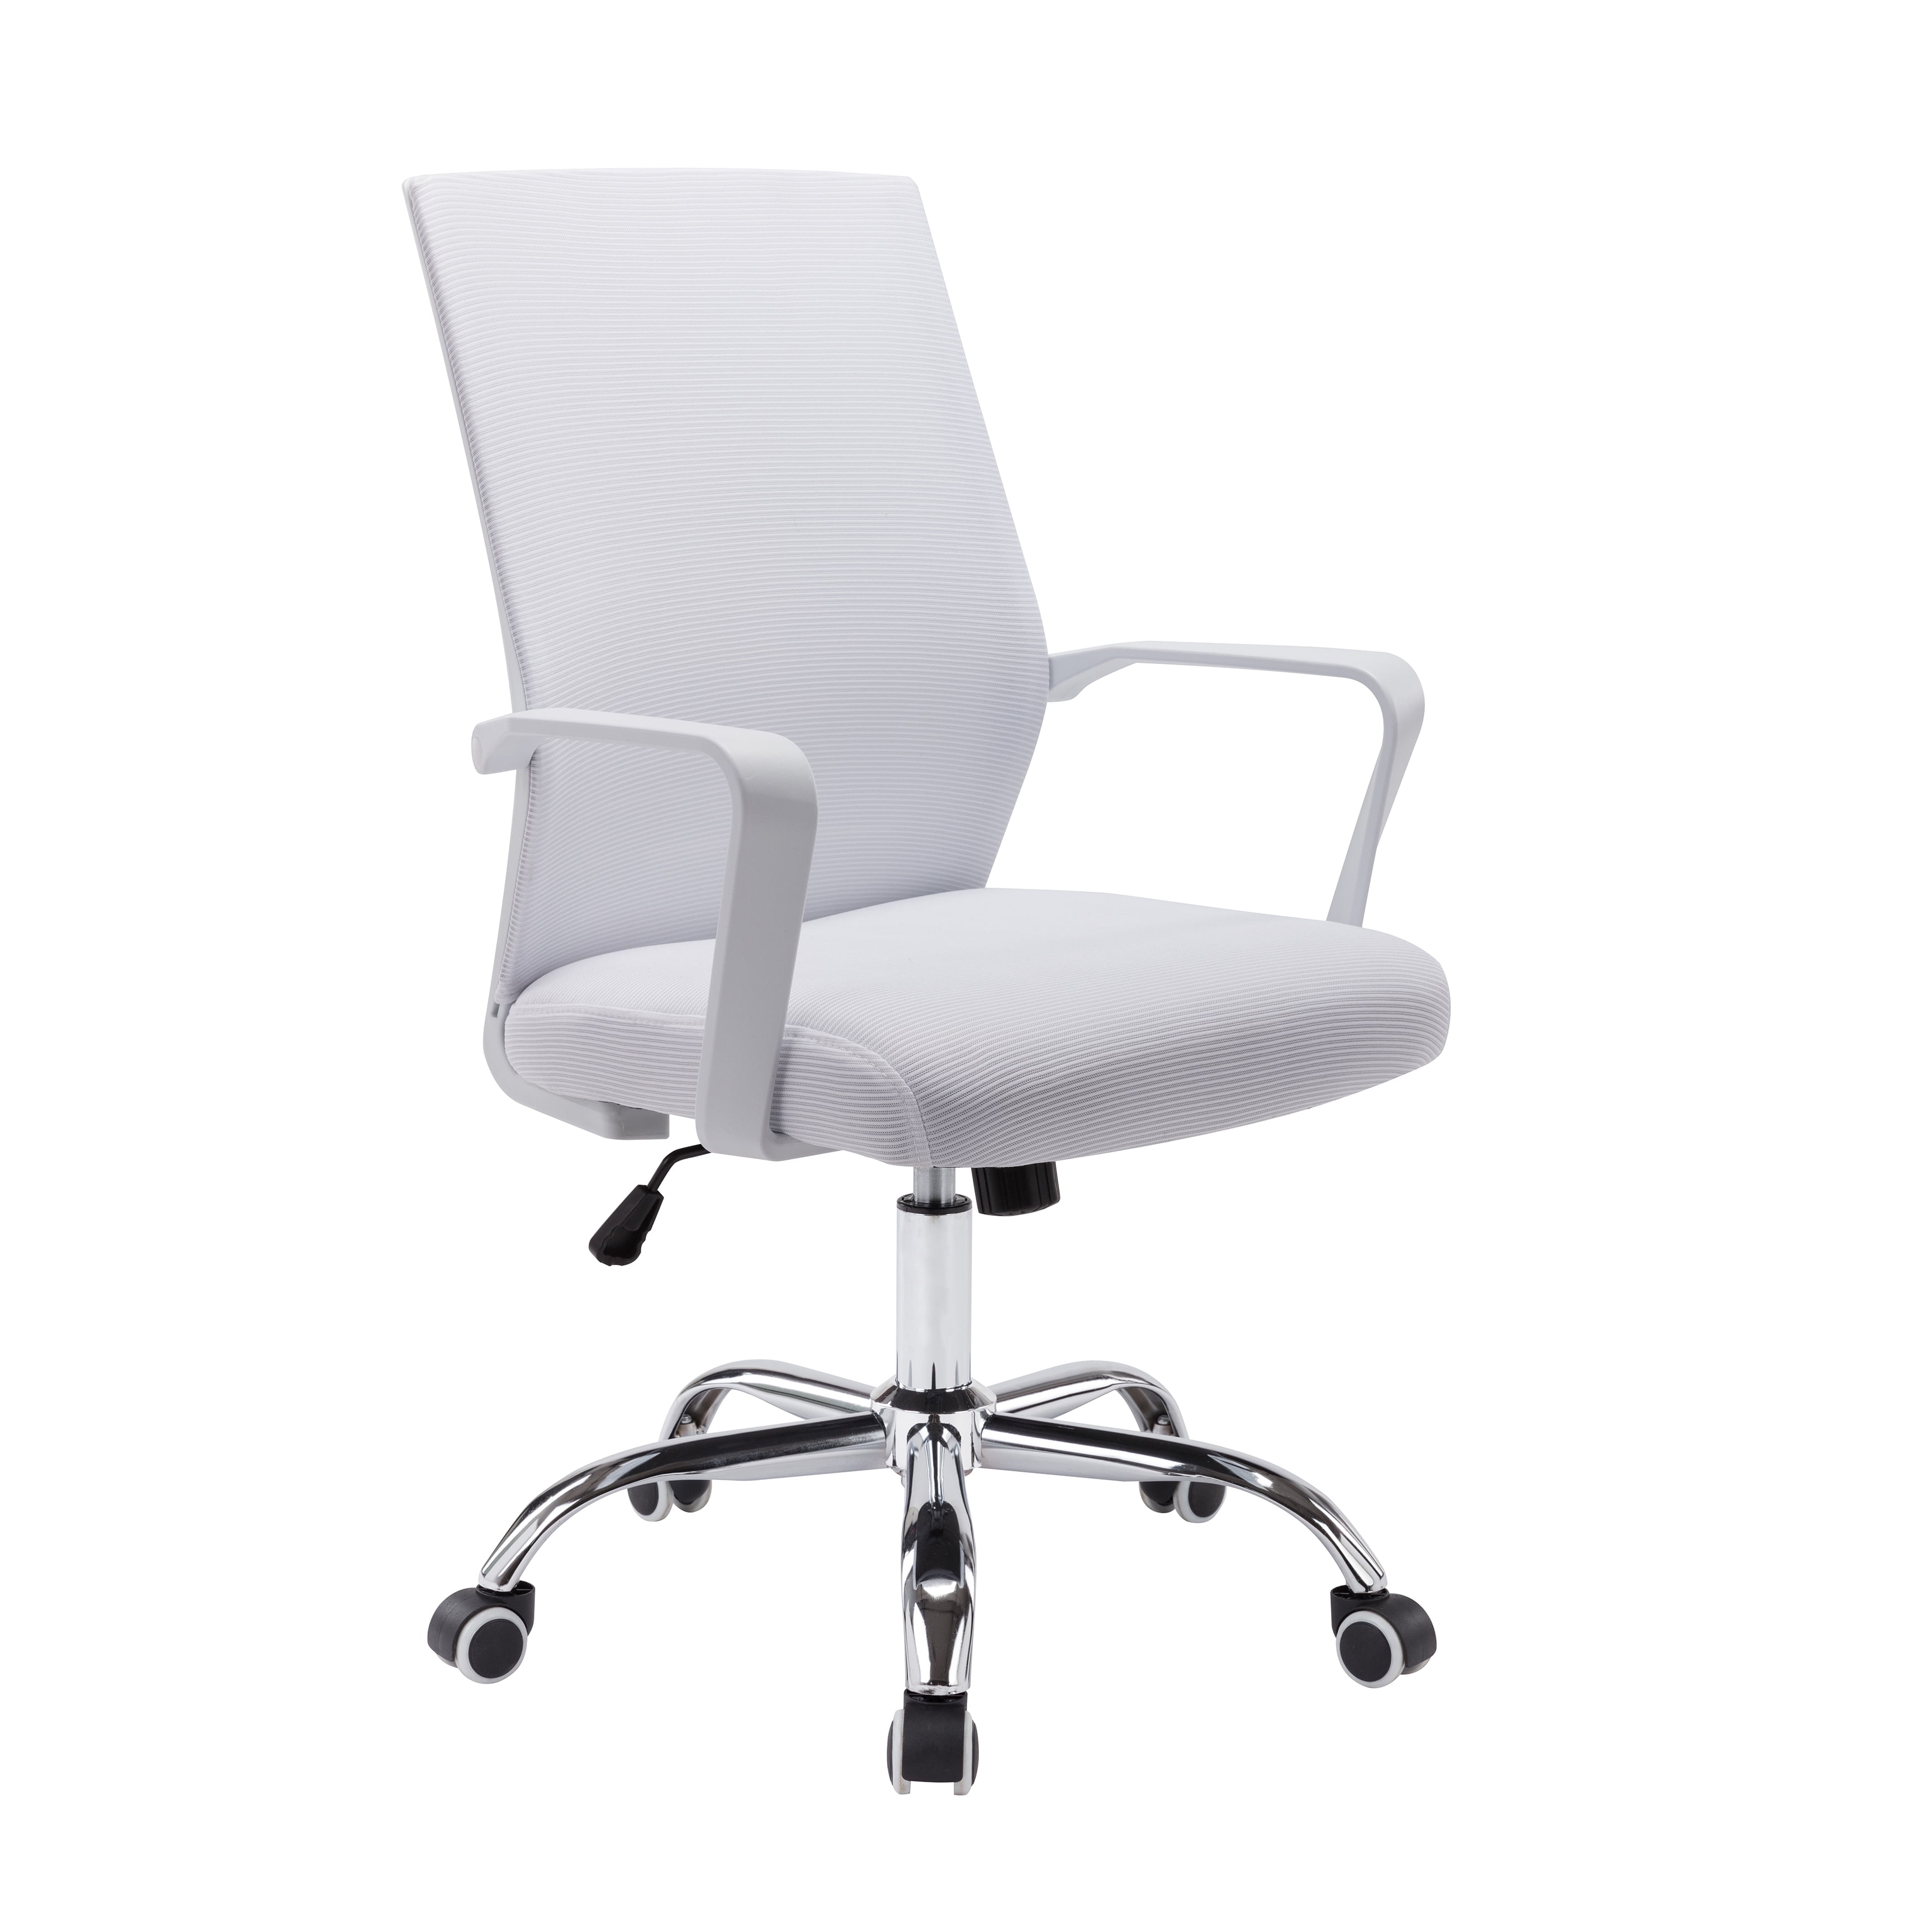 REBOXED Quality Cushioned Computer Desk Office Chair Chrome Legs Swivel in White